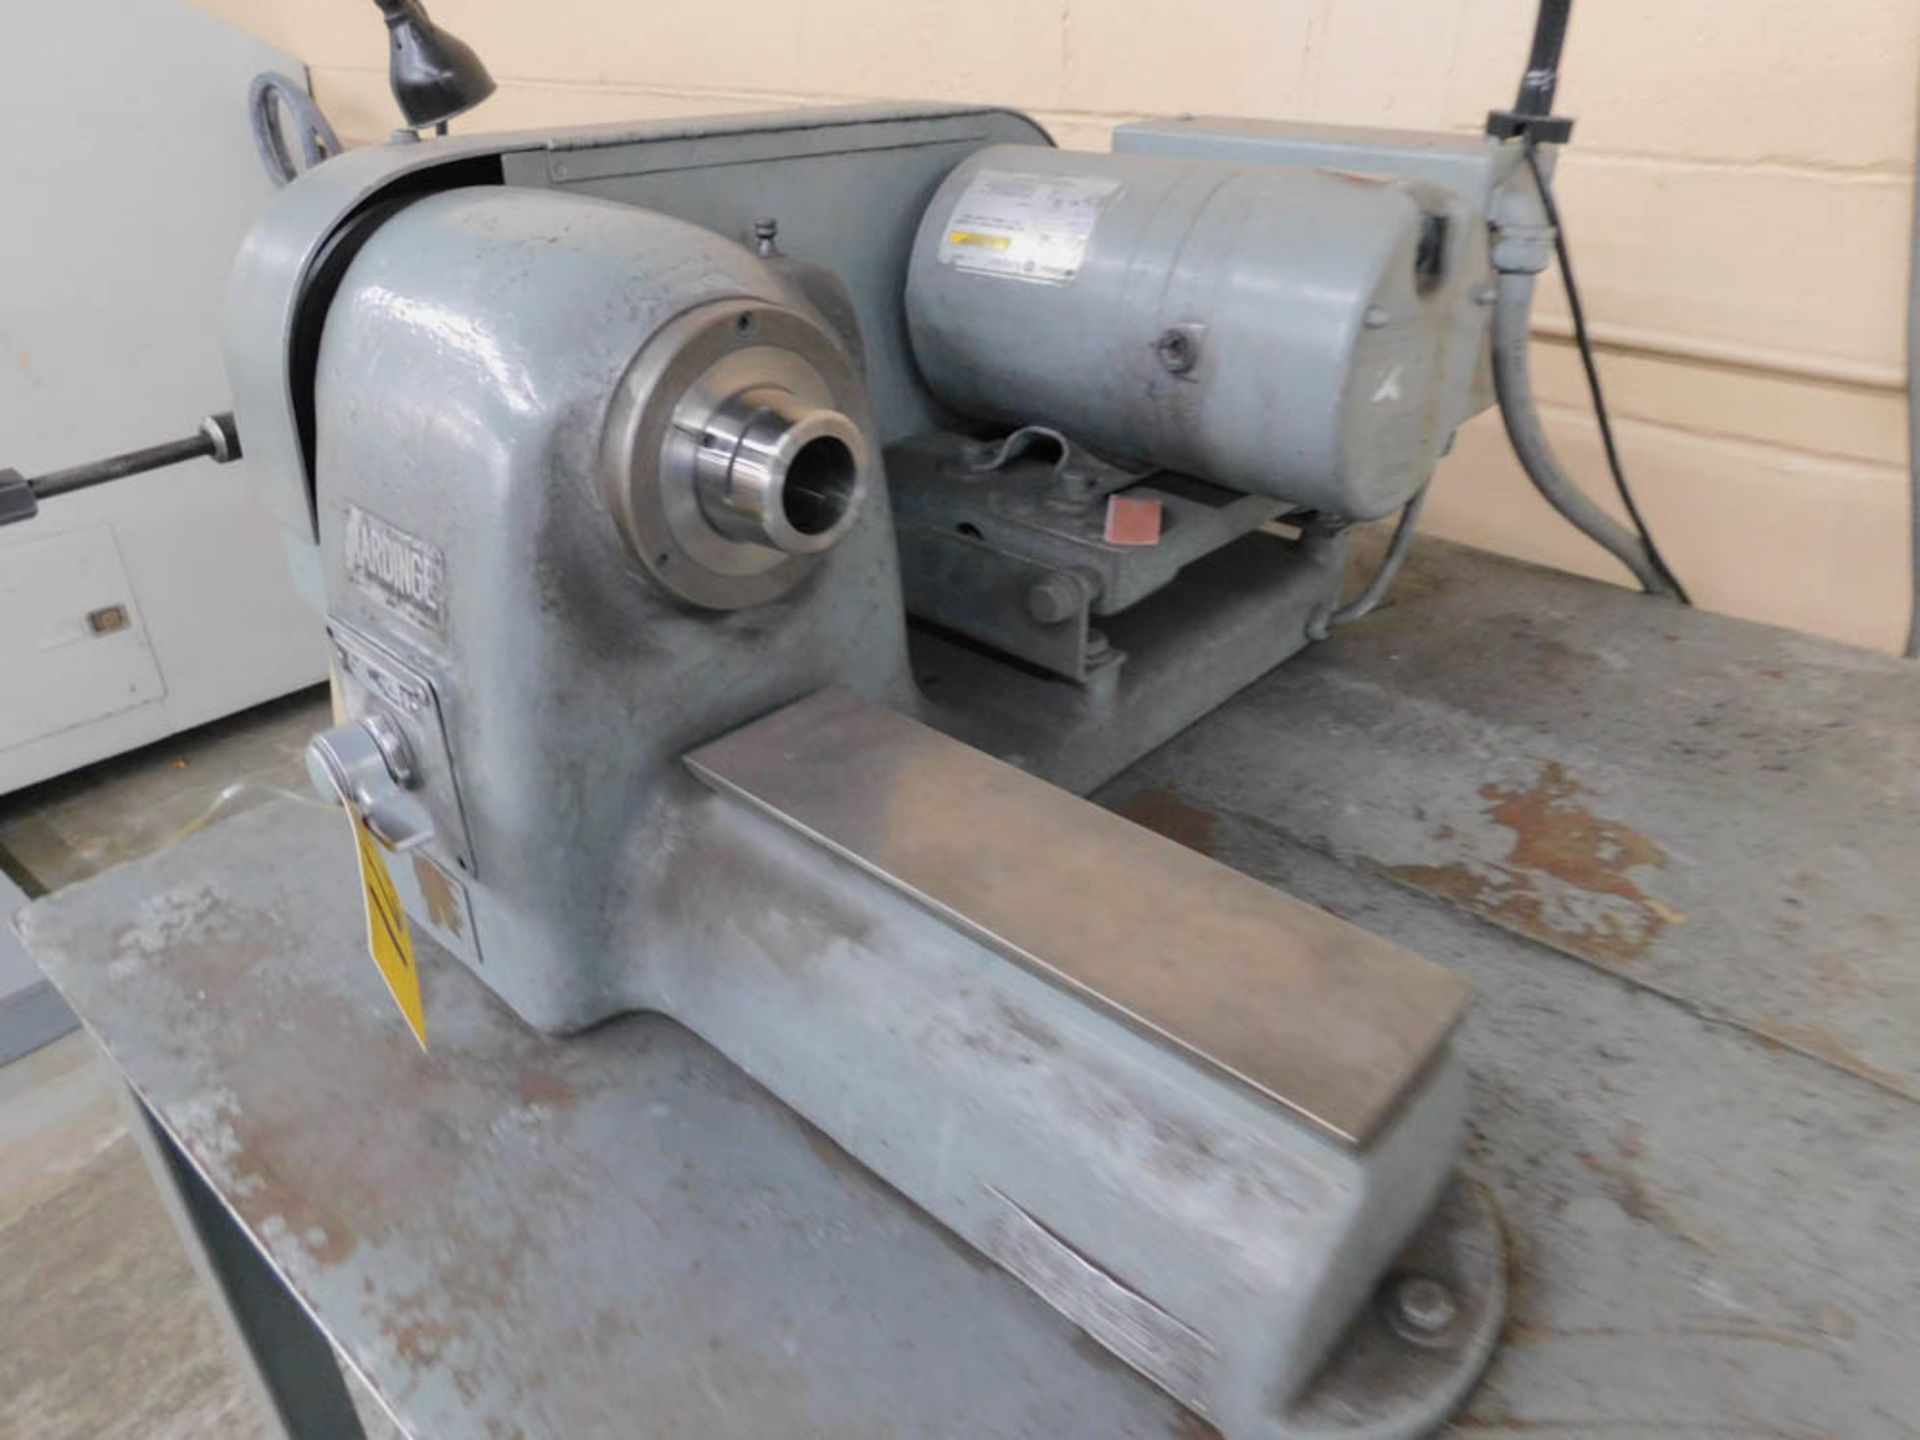 HARDINGE MDL. HSL SPEED LATHE, QUICK ACTING DRAW BAR, 1/2HP, 5C COLLET, S/N: HS1-5C-4884T - Image 2 of 2